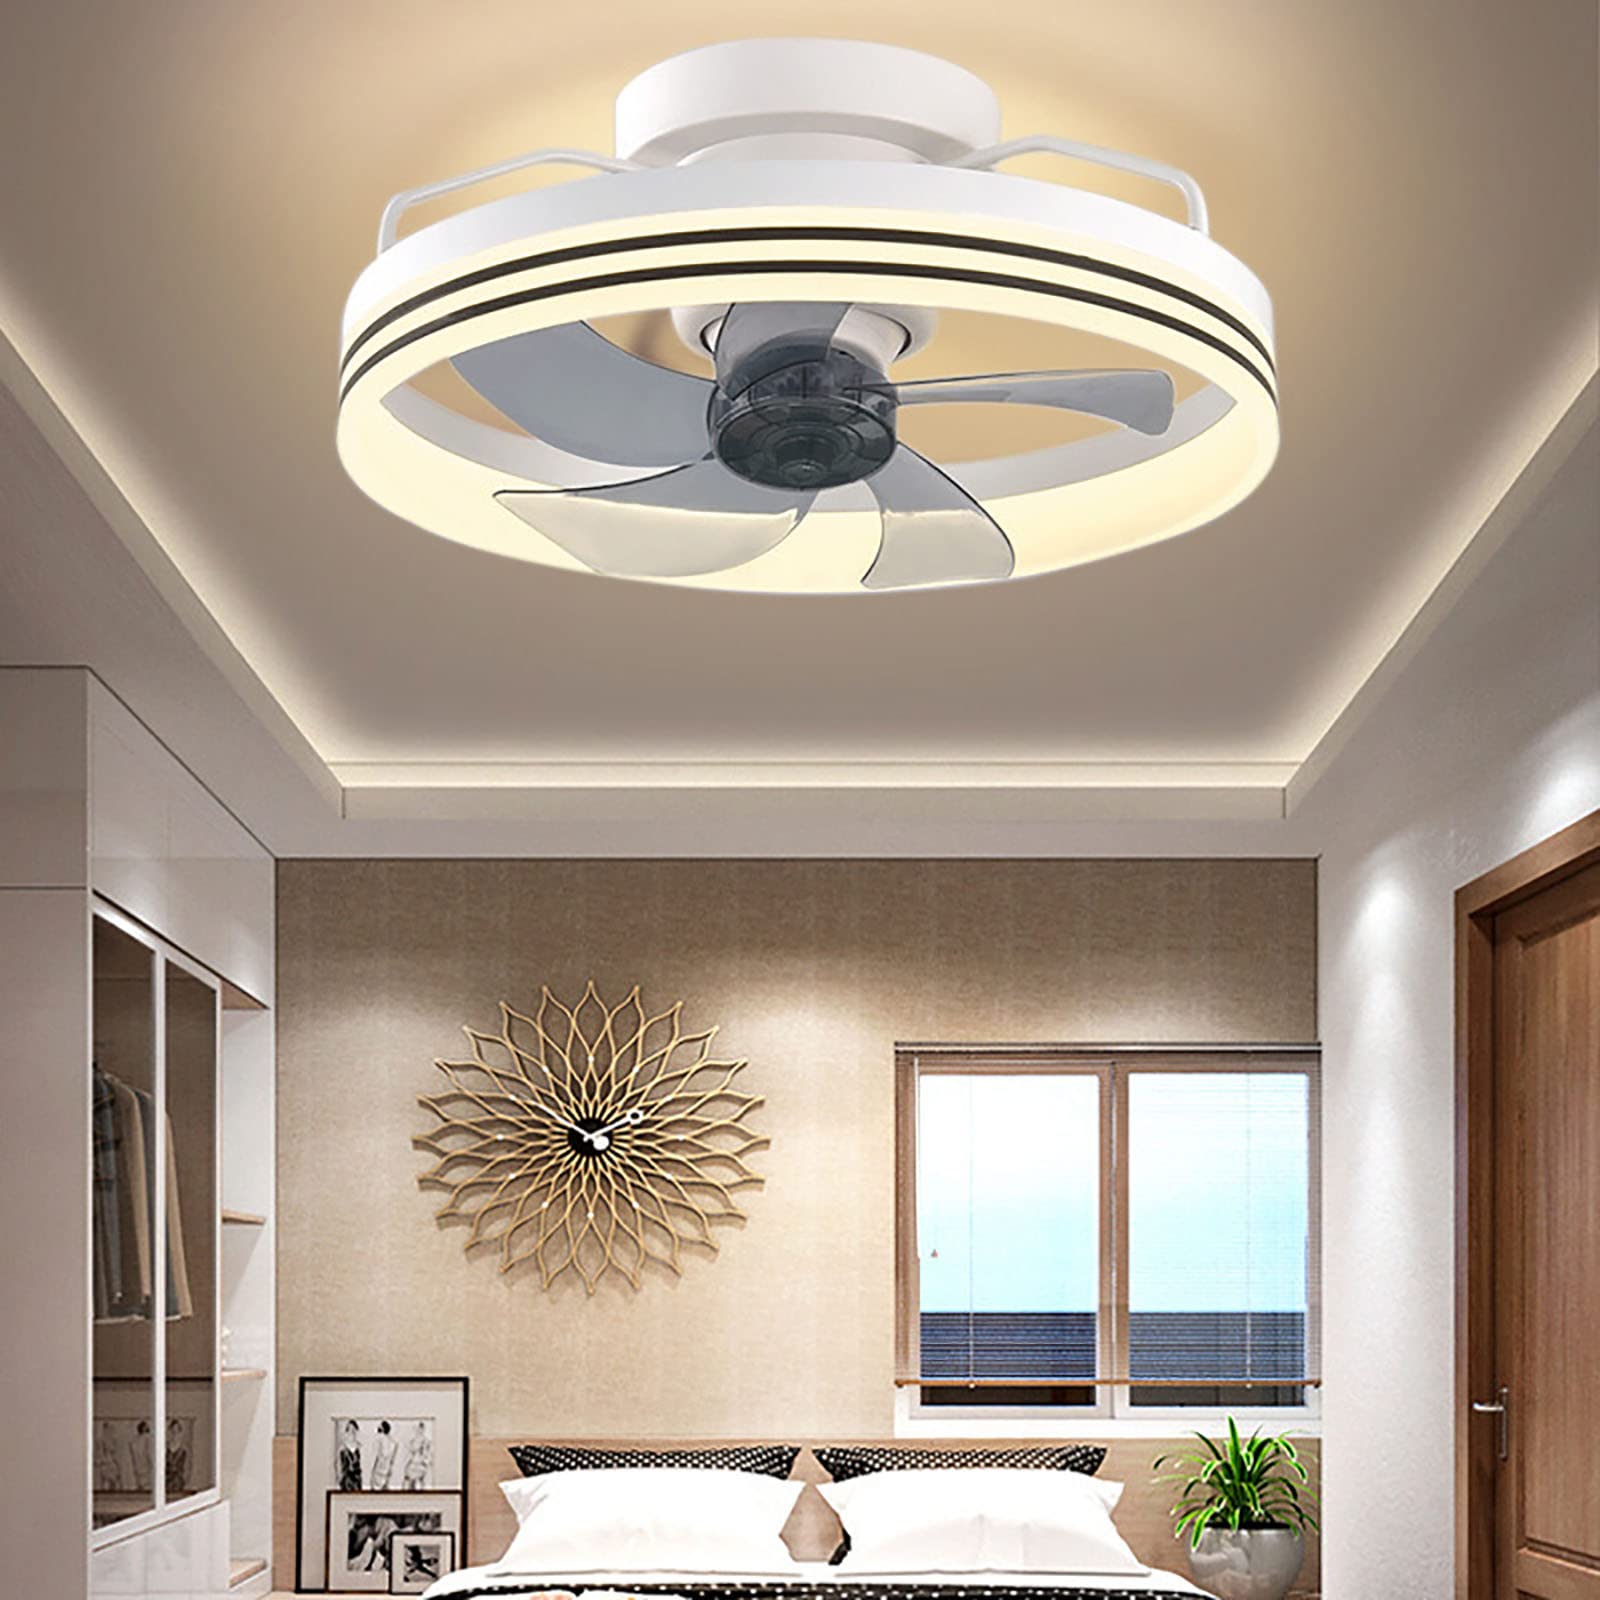 13 Amazing Remote Control Ceiling Fan For 2023 1690780136 